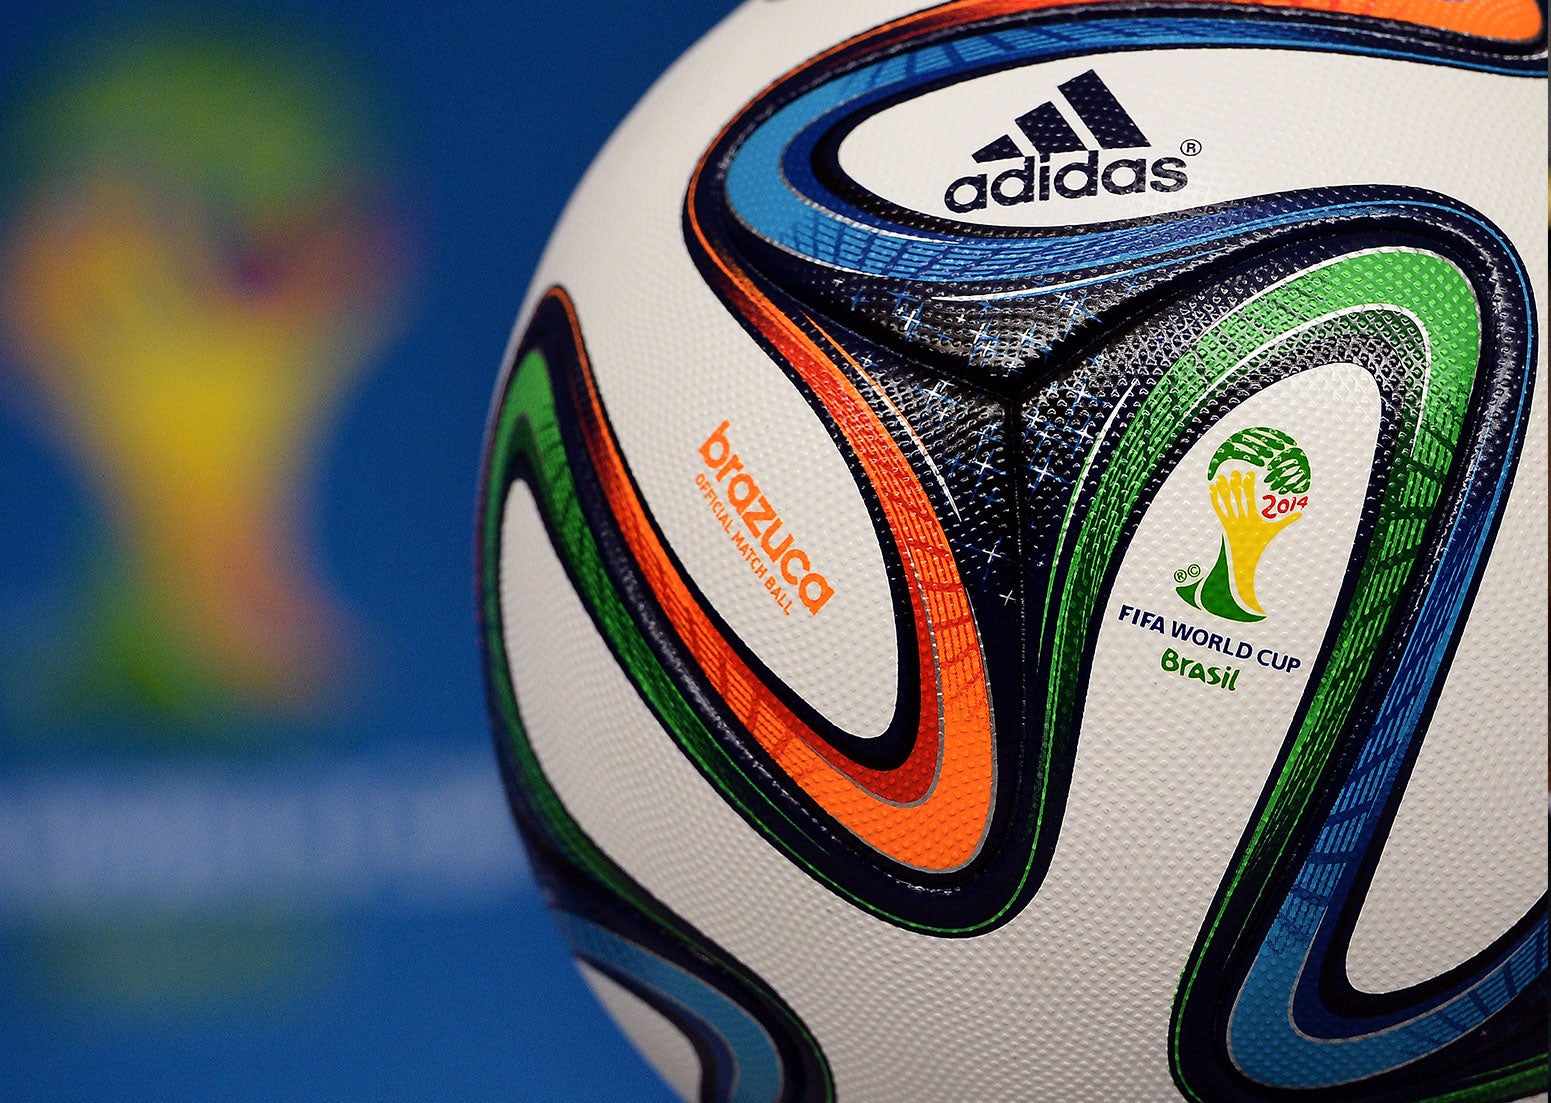 Adidas was a World Cup sponsor in Brazil but failed to capitalise on football competition